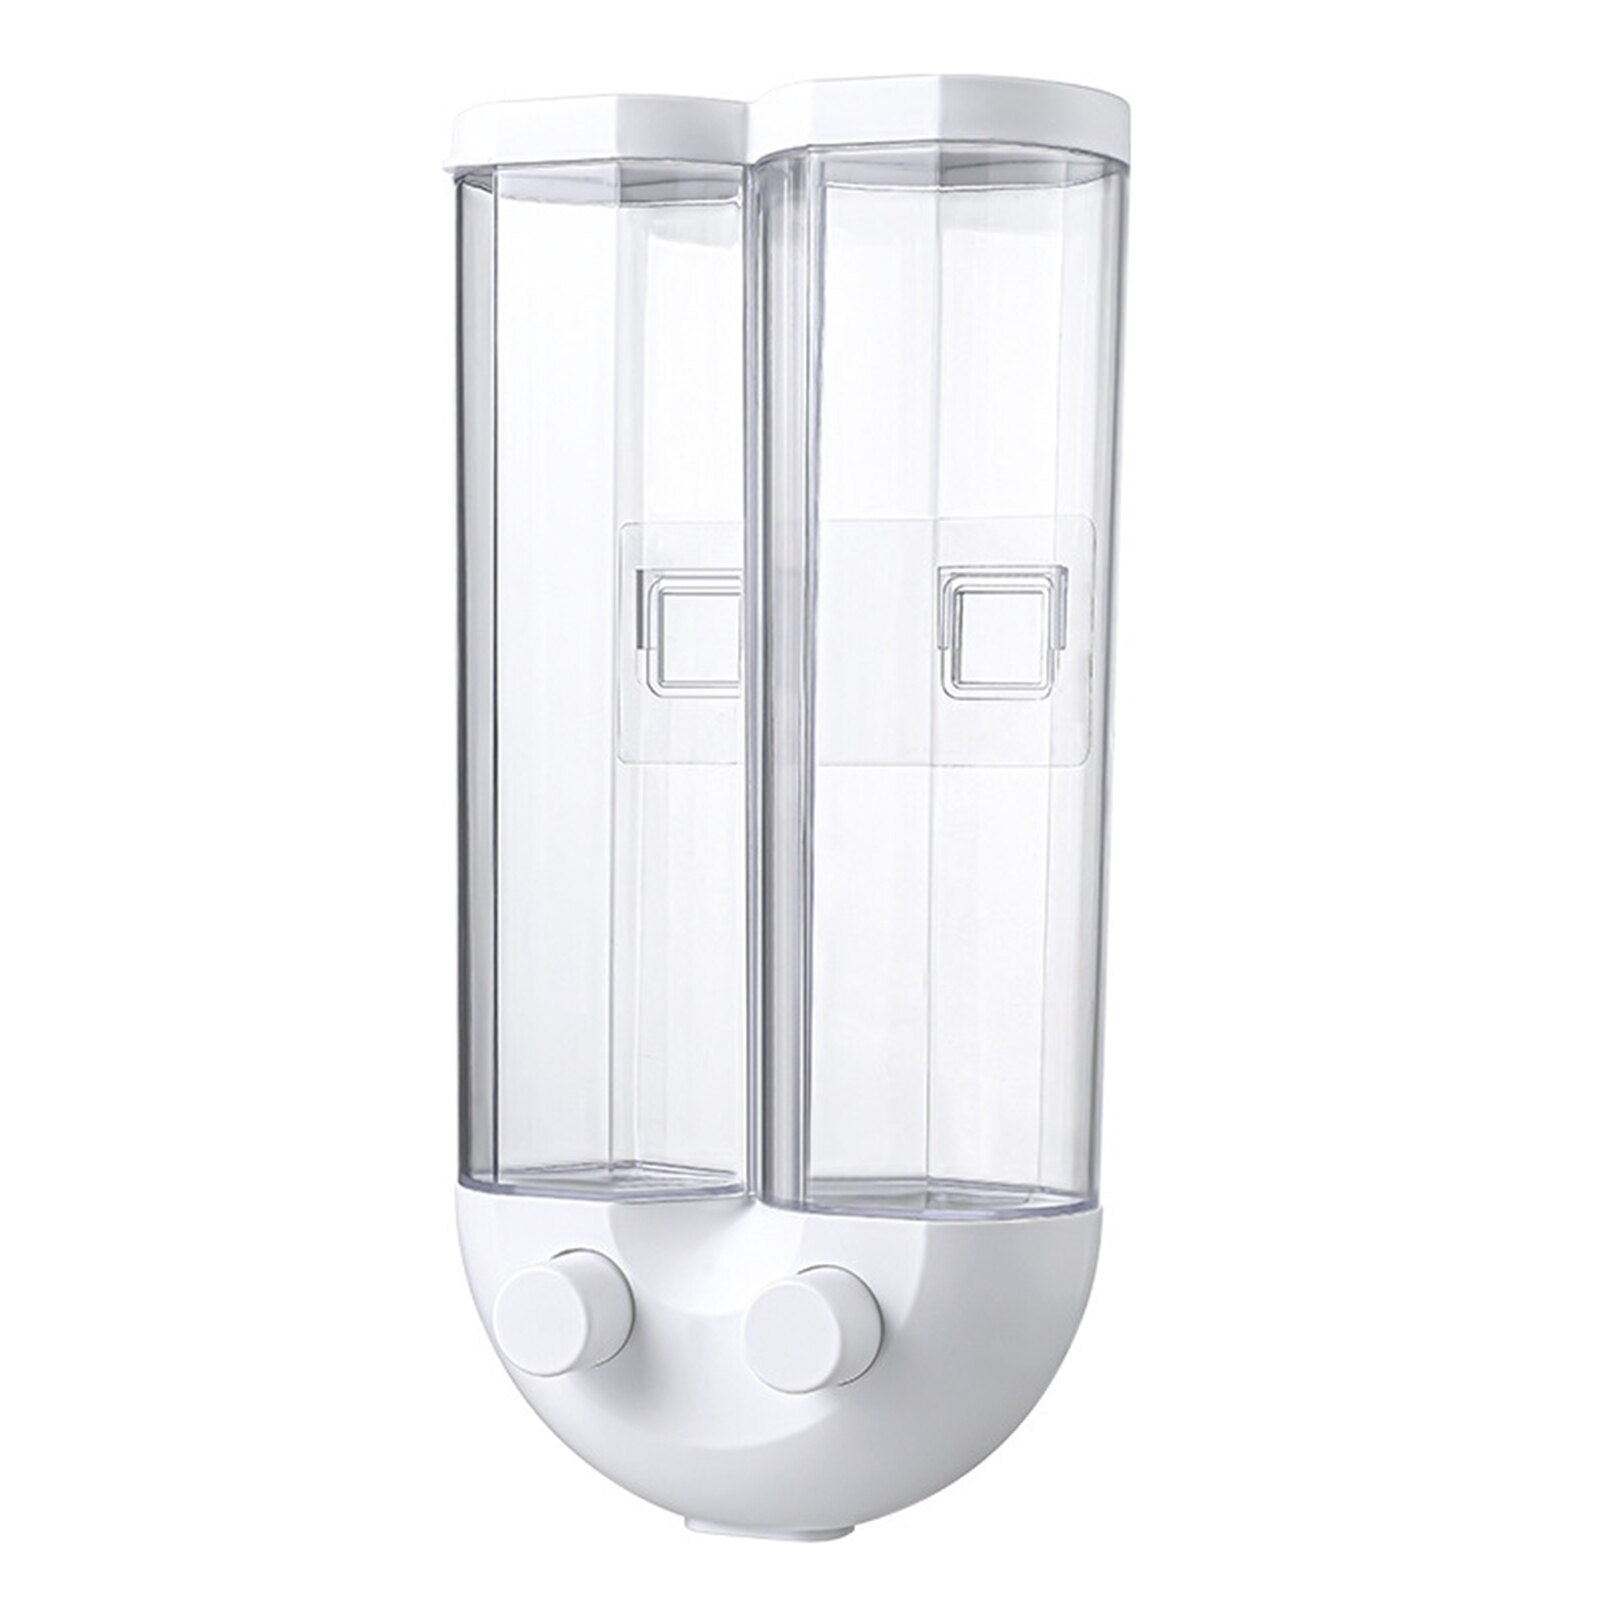 Double Wall Mounted Food Dispenser Storage Container